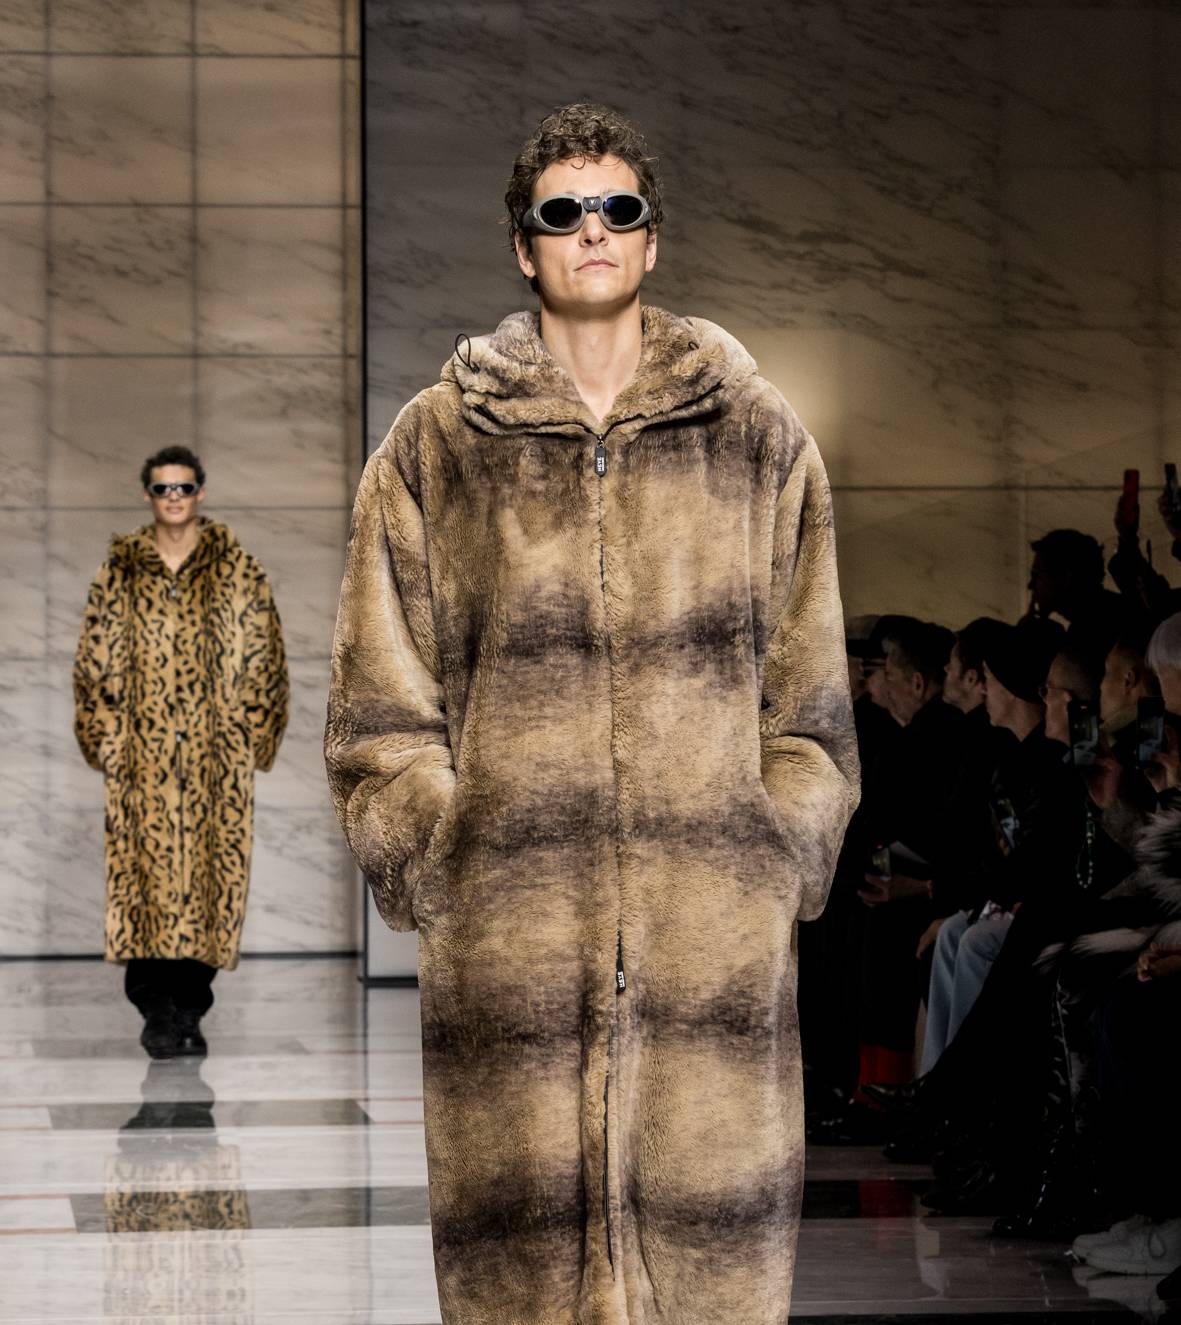 ARMANI PRESENTS THE MEN'S FALL WINTER COLLECTION 20232024